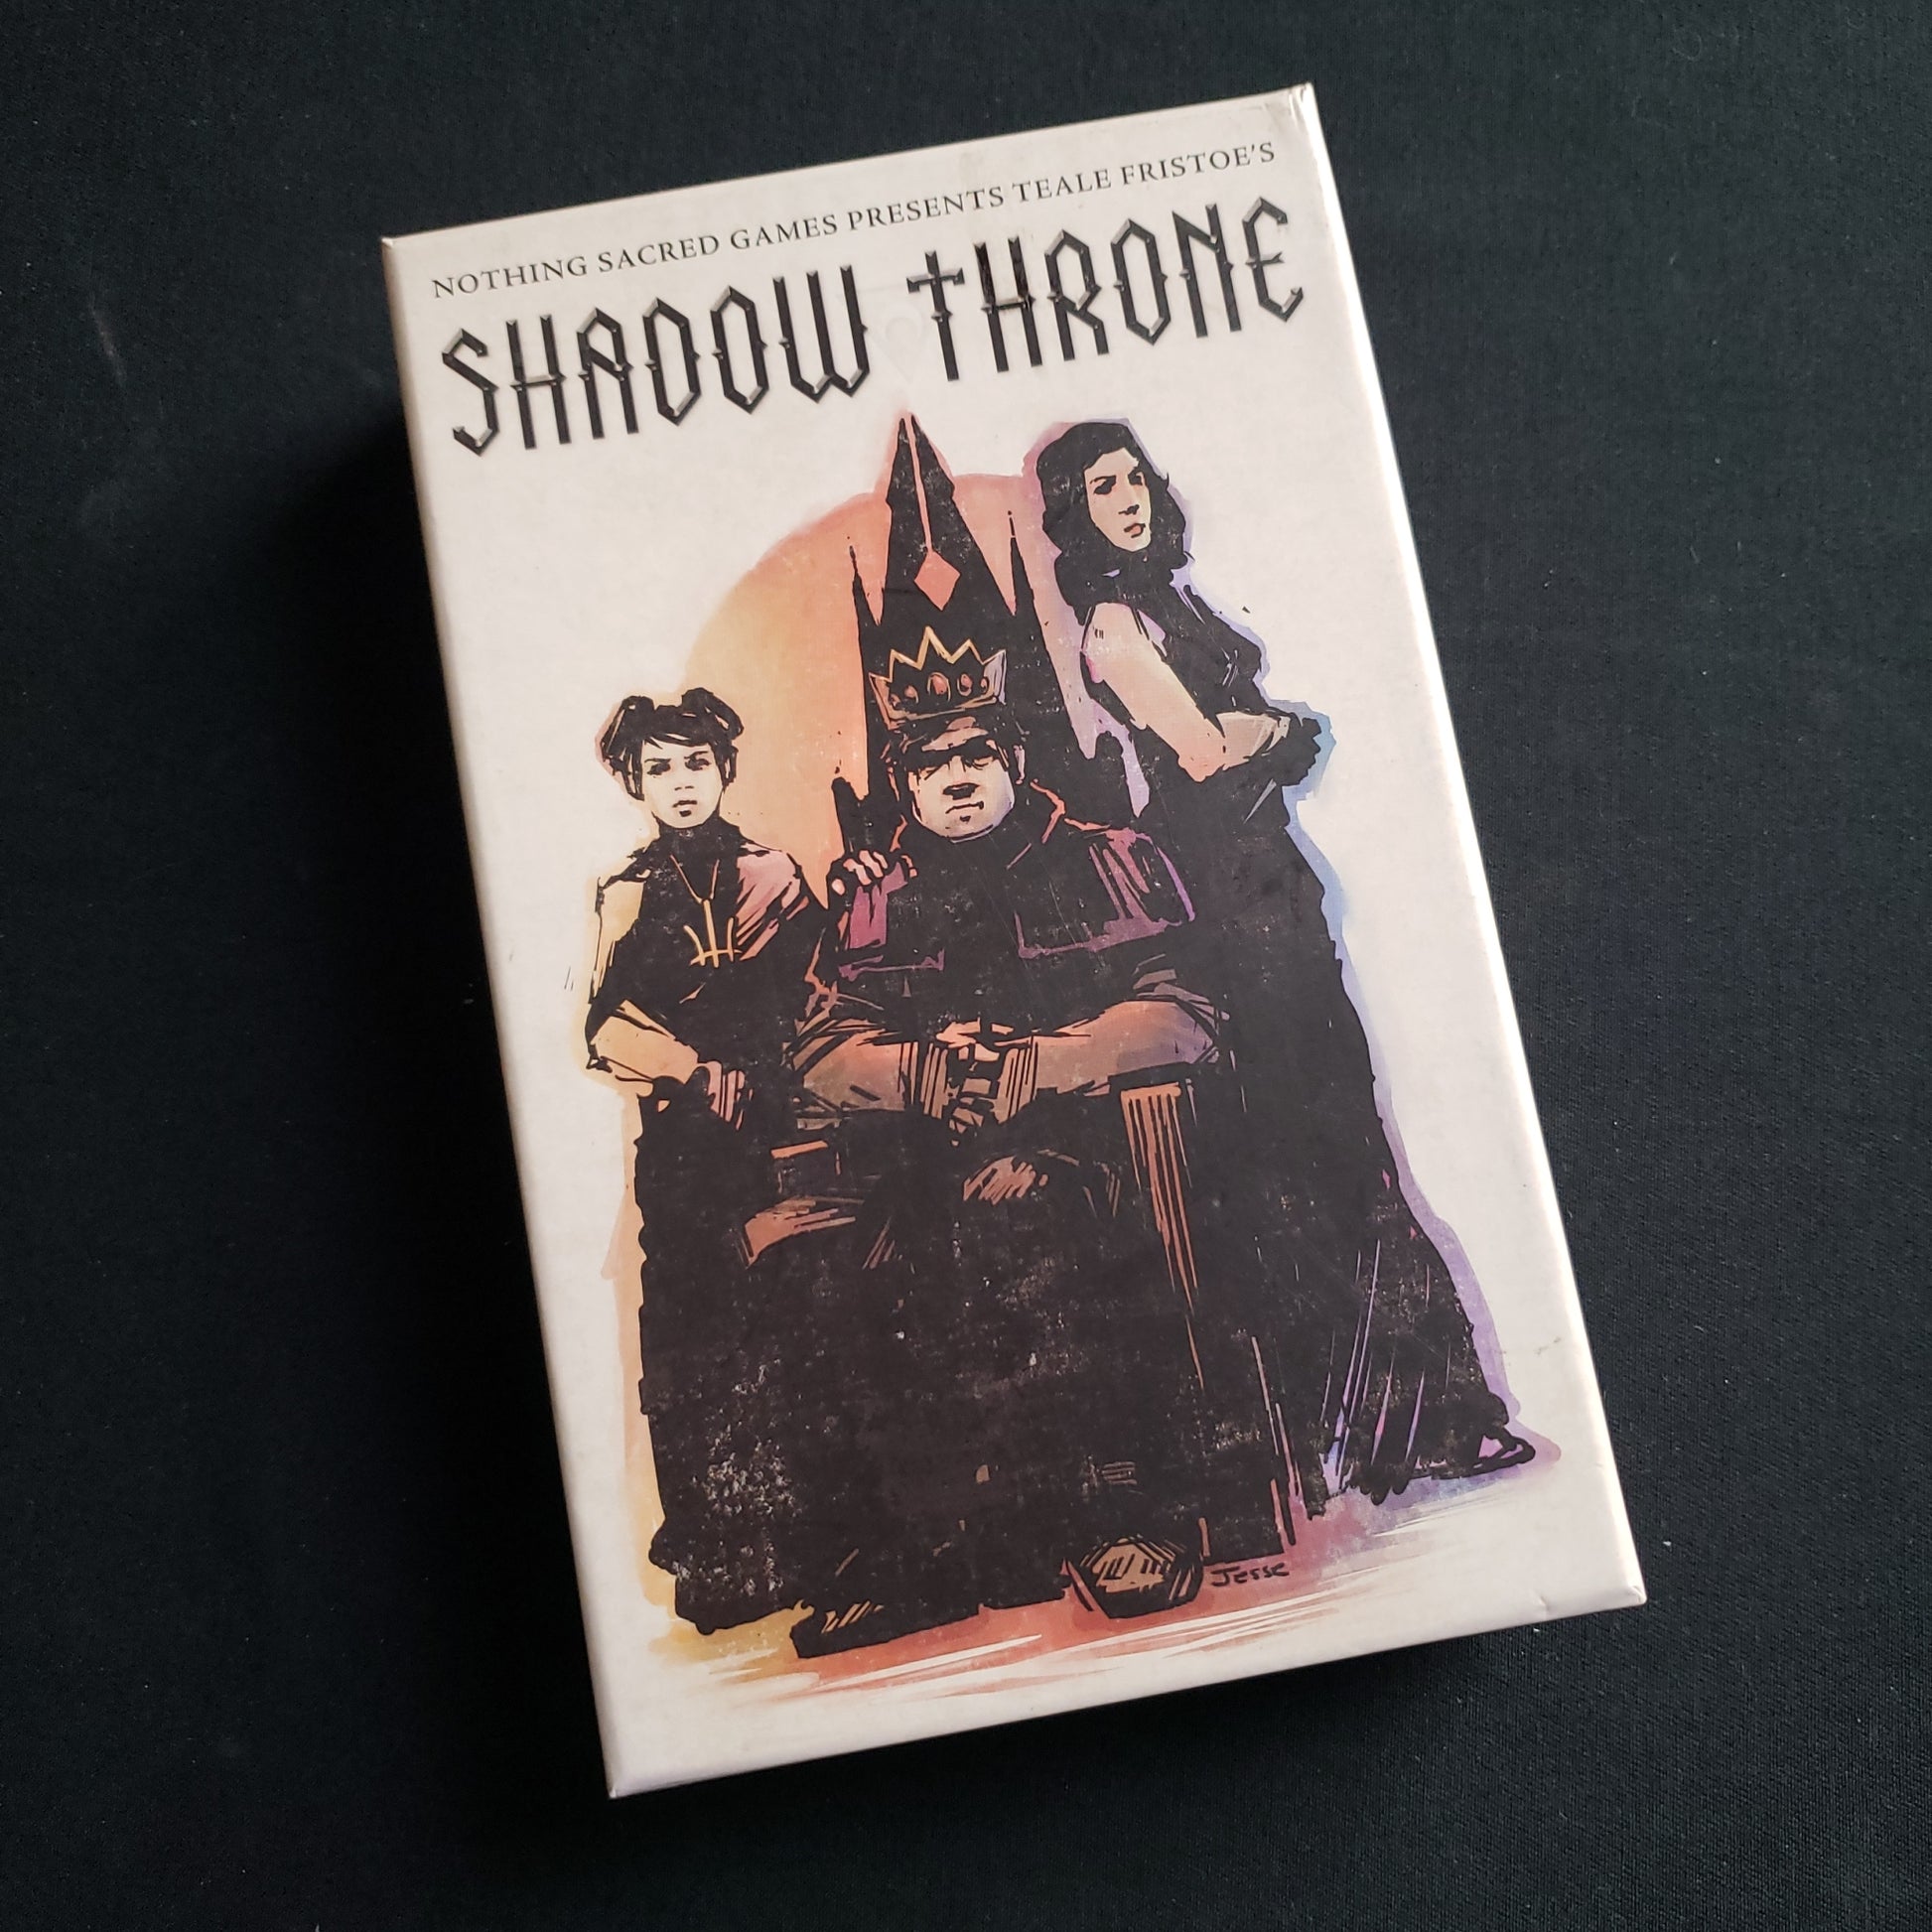 Image shows the front cover of the box of the Shadow Throne card game